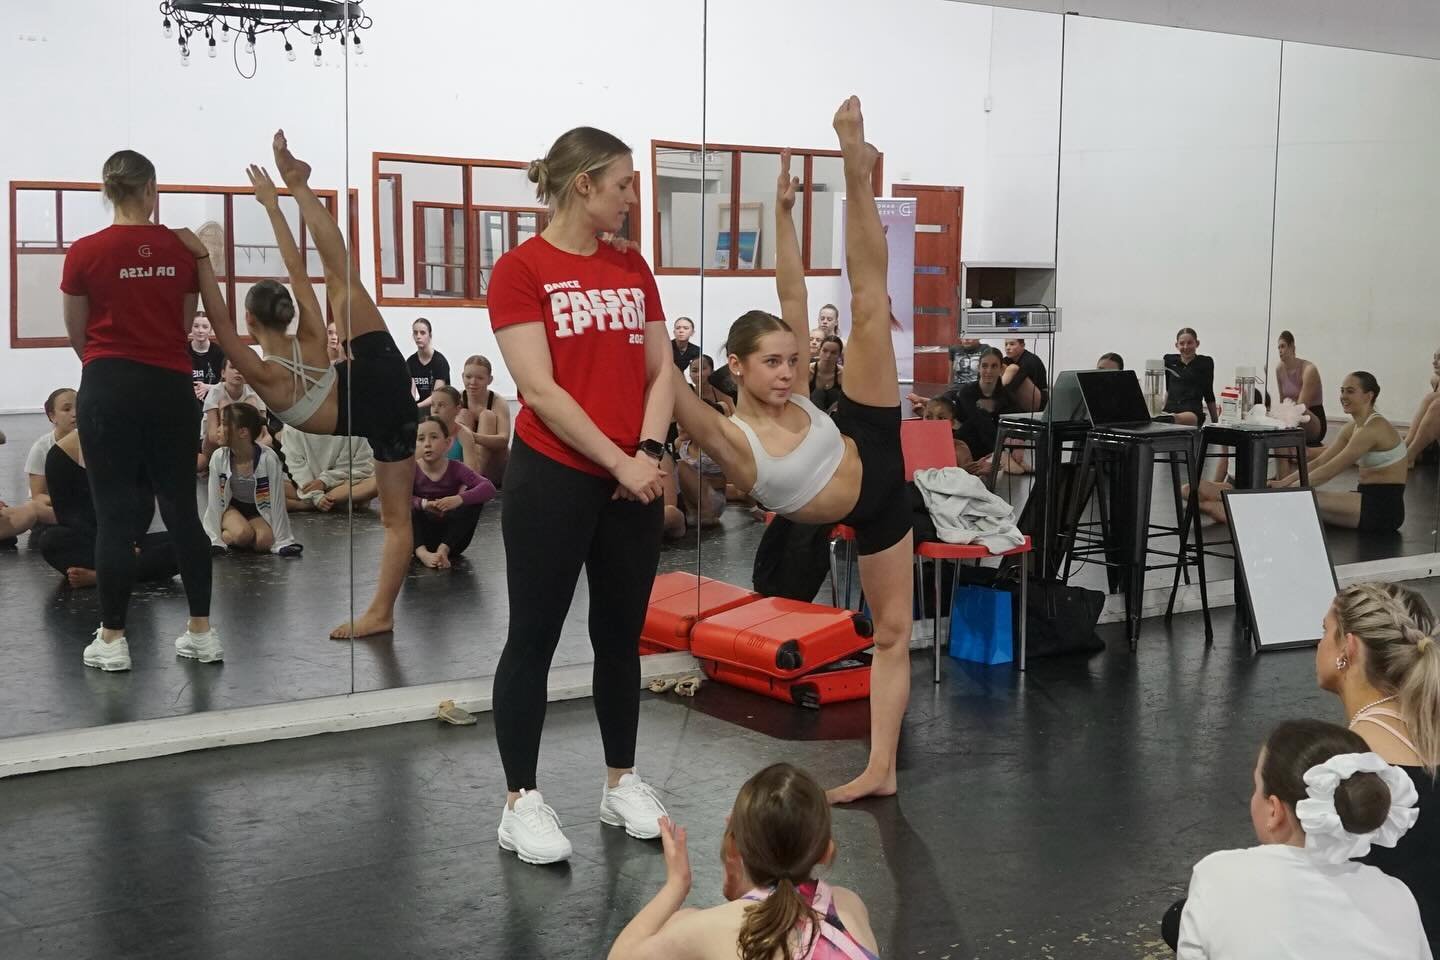 Hey guess what⁉️ At the upcoming workshops on June 1st we will be holding mid year intake auditions for the 2024 Sydney Dance Prescription team! For those wanting to be considered for our fortnightly training program, Coach Chloe and I will be select